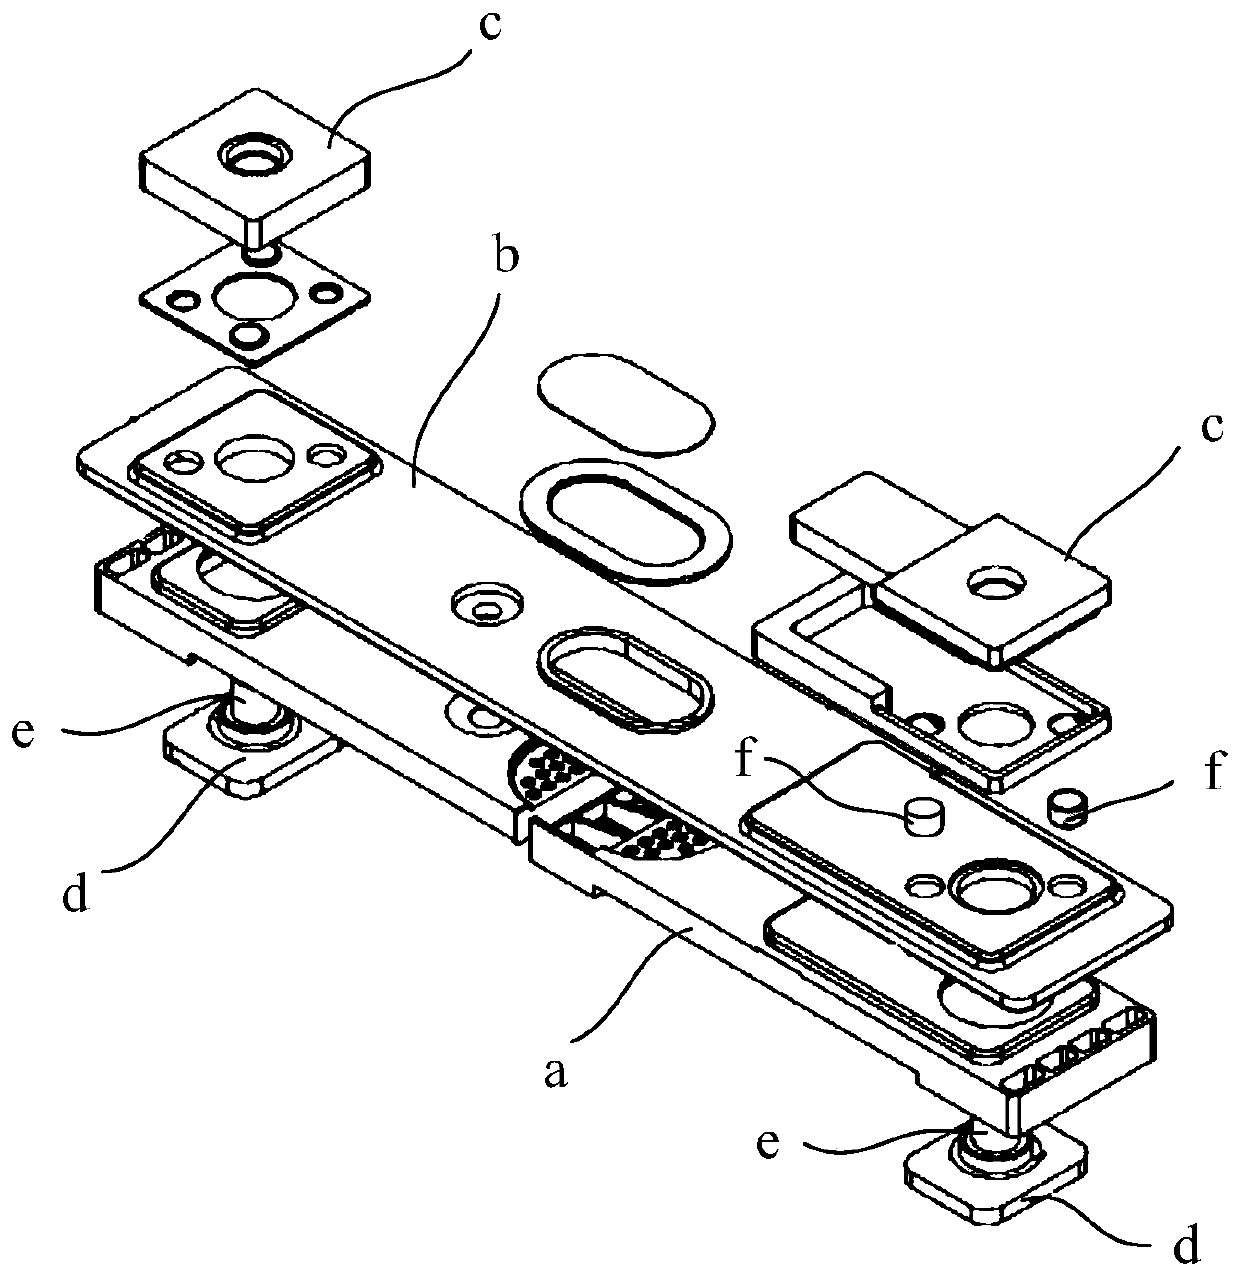 Connecting piece, cover plate assembly, and battery